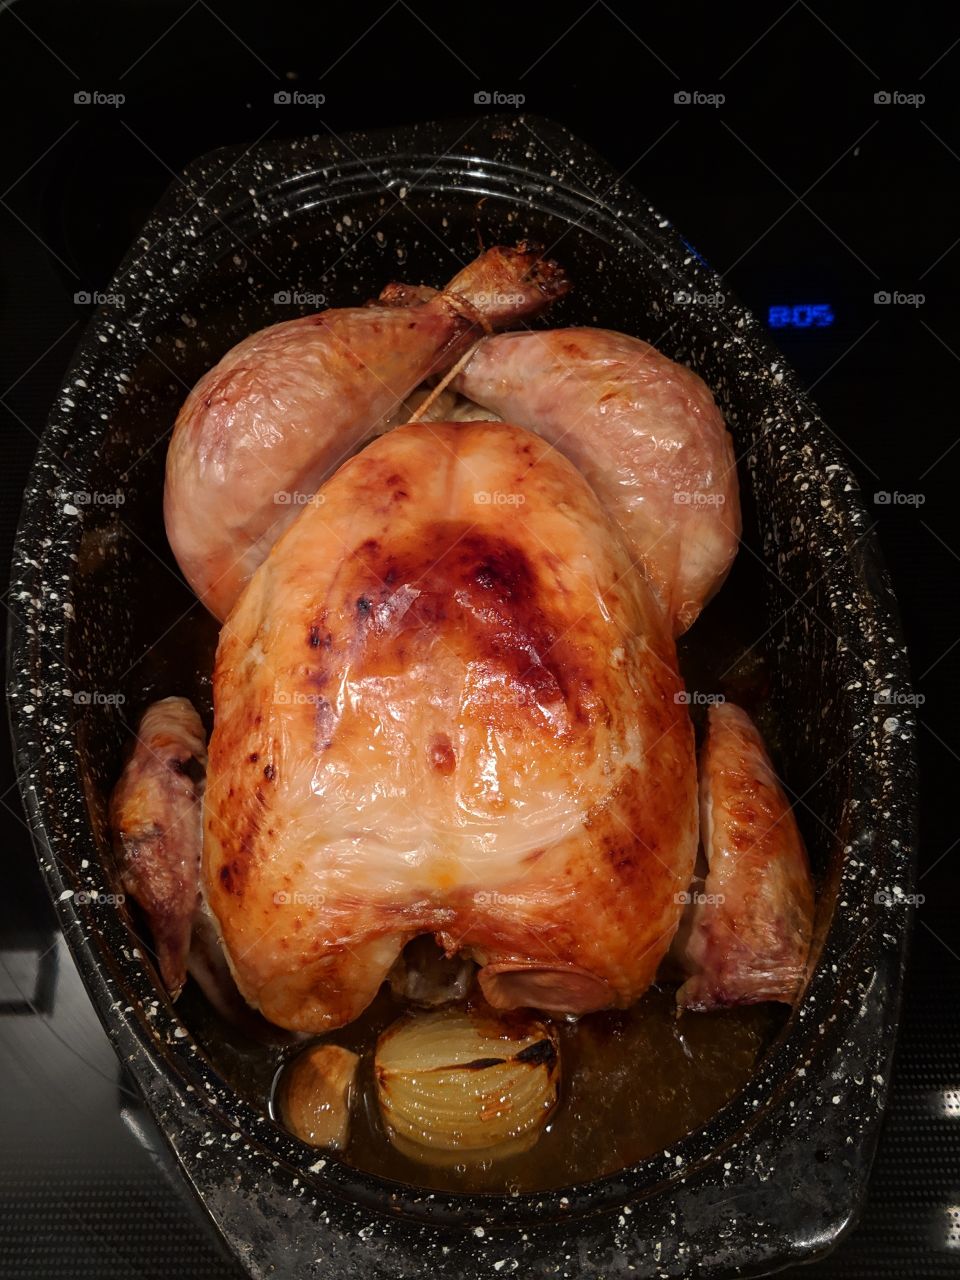 Perfectly roasted chicken with golden brown skin. Juicy chicken in roasting pan. cooked to perfection